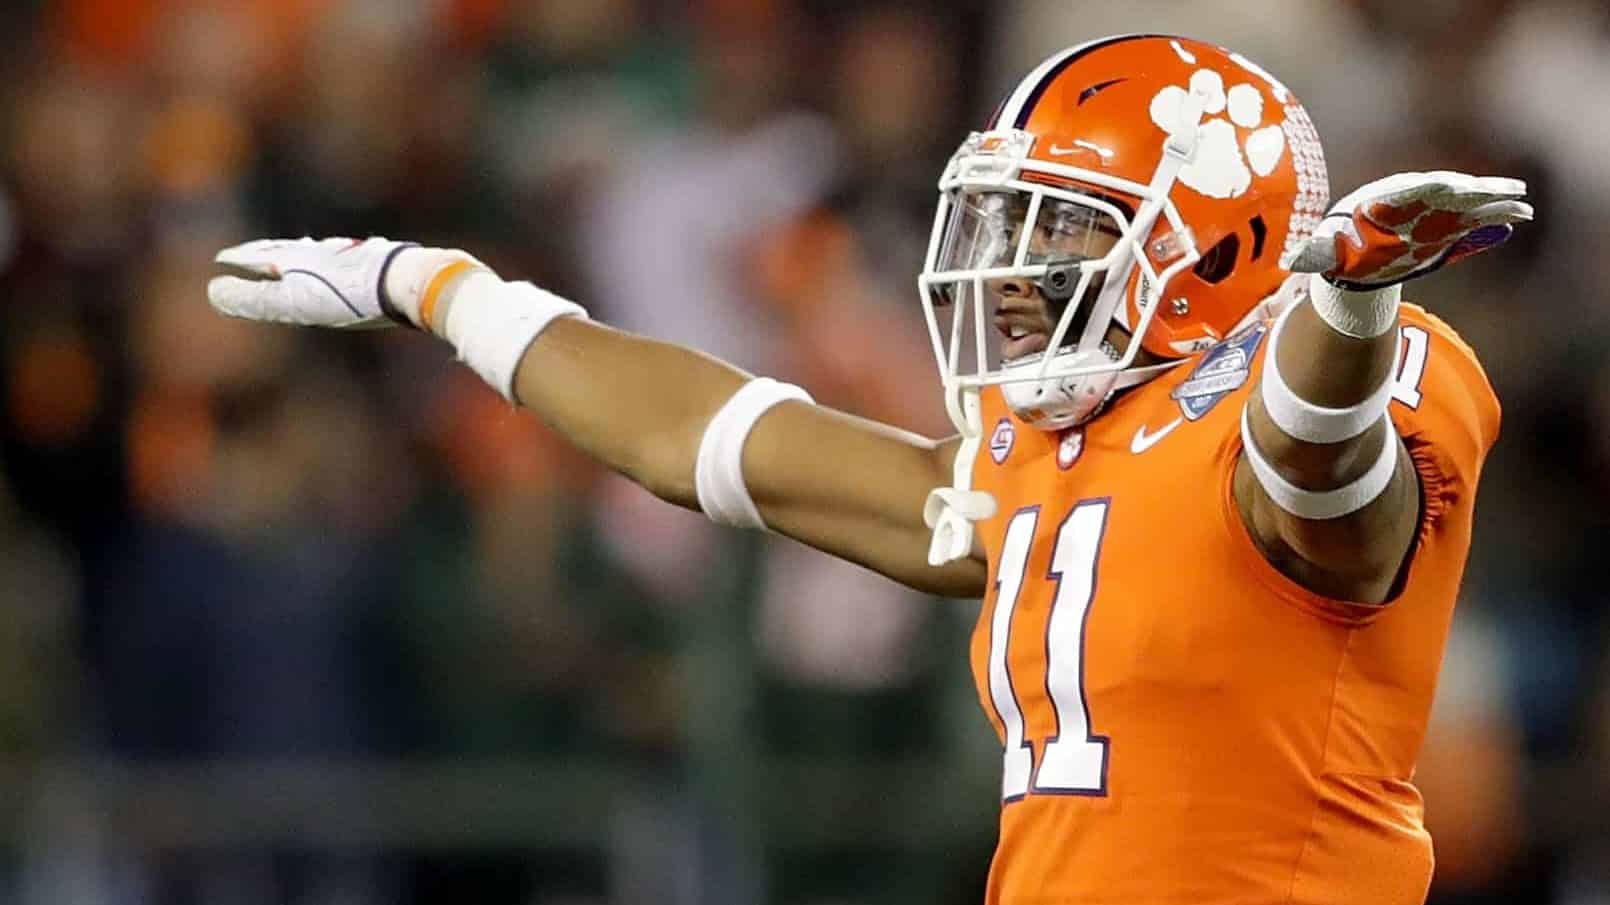 CHARLOTTE, NC - DECEMBER 02: Isaiah Simmons #11 of the Clemson Tigers reacts after a pass break up against the Miami Hurricanes in the second quarter during the ACC Football Championship at Bank of America Stadium on December 2, 2017 in Charlotte, North Carolina.